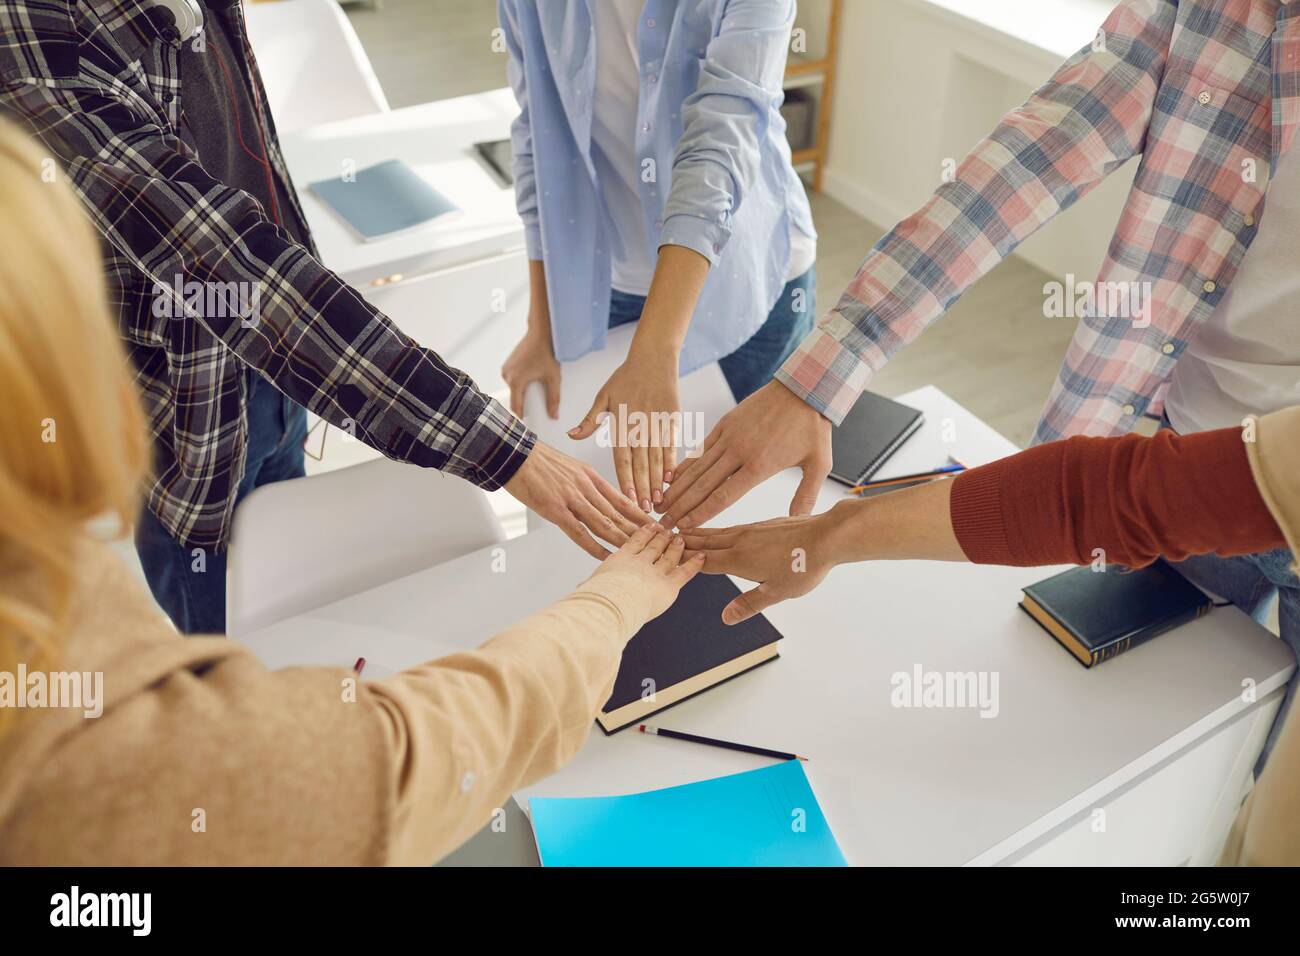 Group of high school or college students join hands promising to support each other Stock Photo